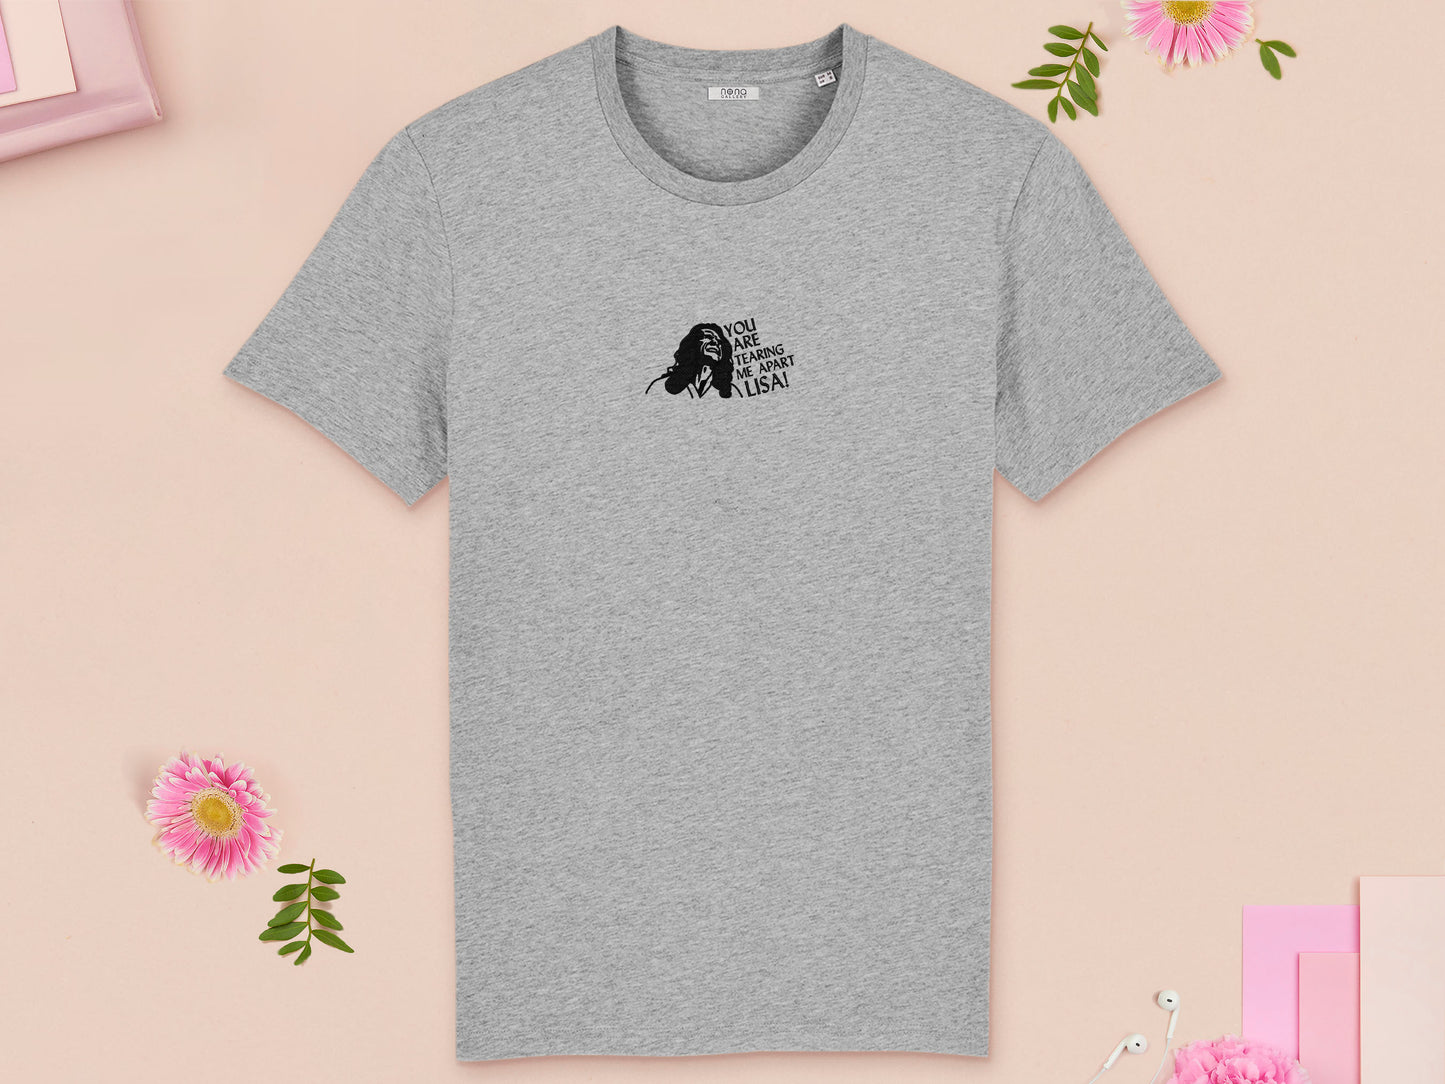 A short sleeved grey t-shirt with an embroidered black design of Tommy Wiseau in the movie The Room with the quote You Are Tearing Me Apart Lisa!